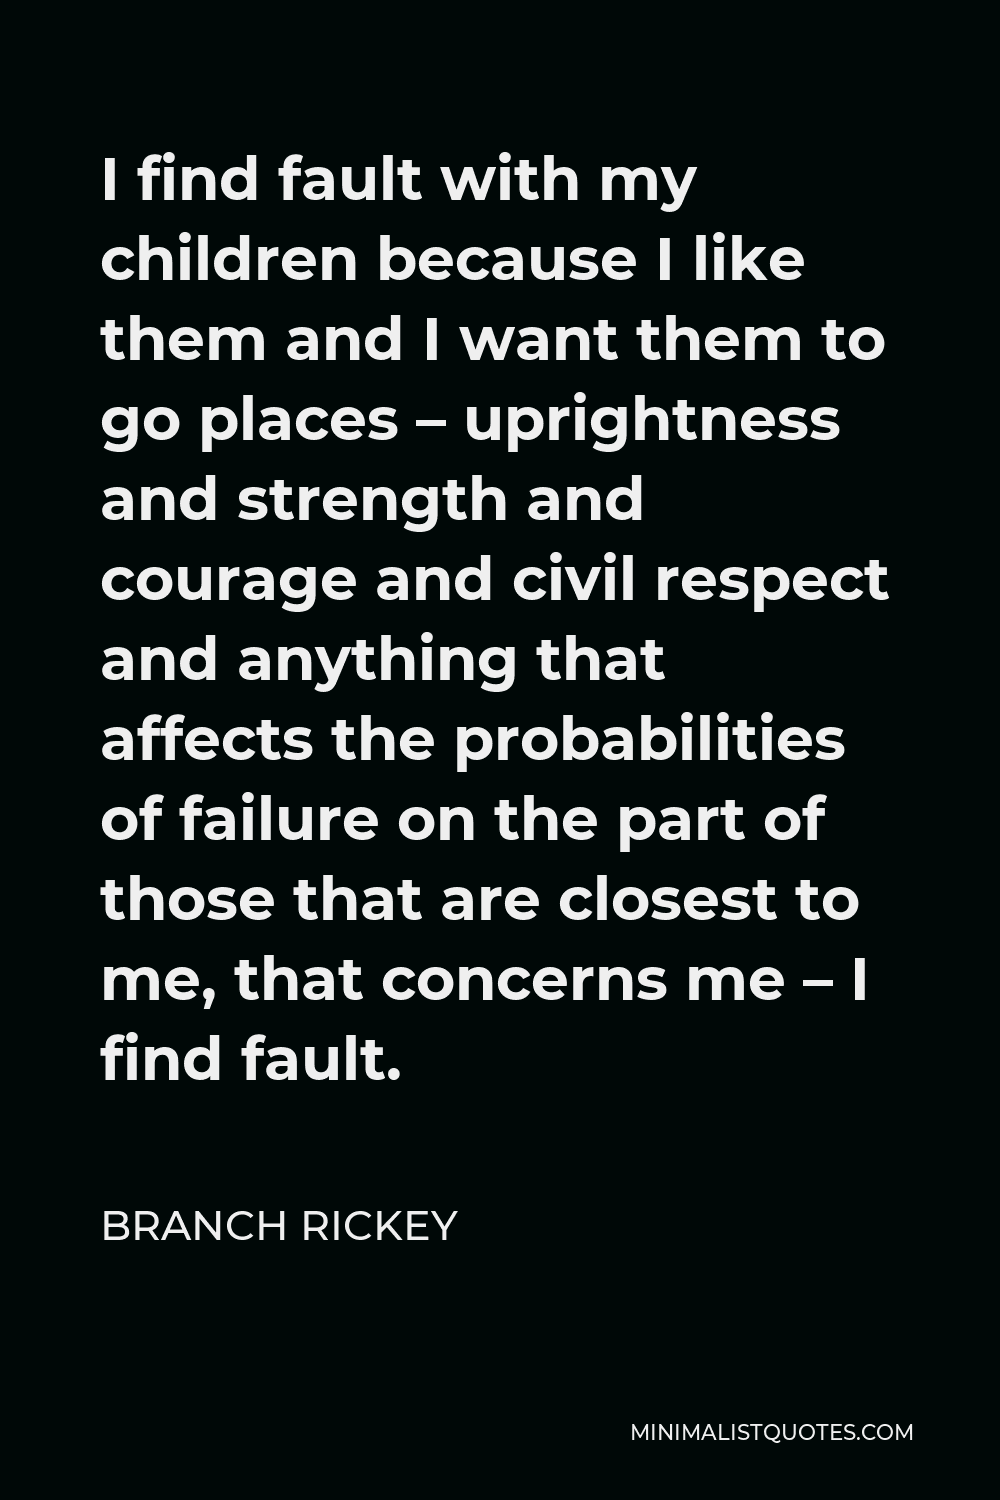 Branch Rickey Quote - I find fault with my children because I like them and I want them to go places – uprightness and strength and courage and civil respect and anything that affects the probabilities of failure on the part of those that are closest to me, that concerns me – I find fault.